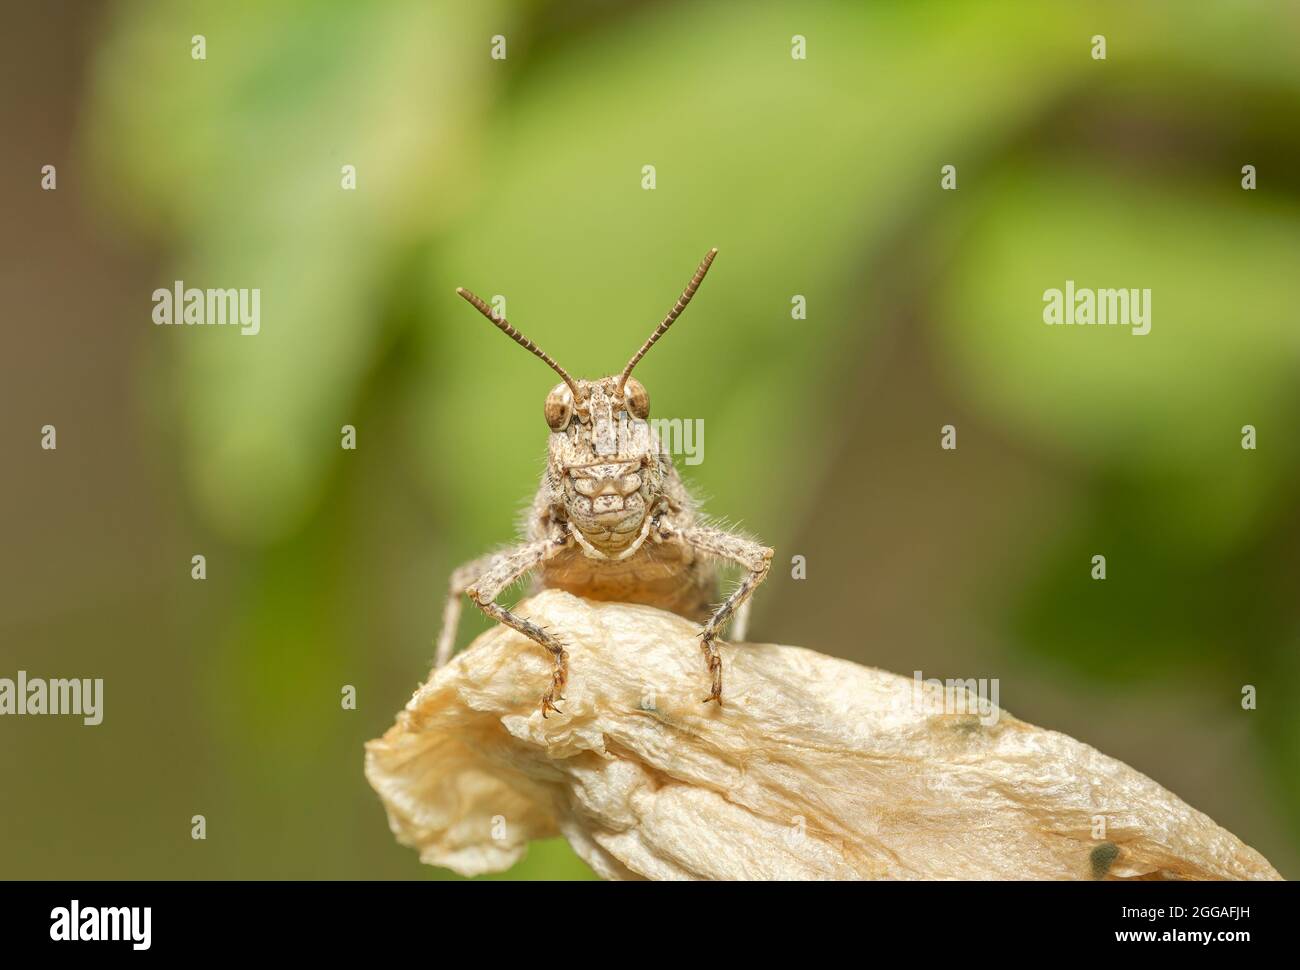 A grasshopper stands on the grass in a field Stock Photo